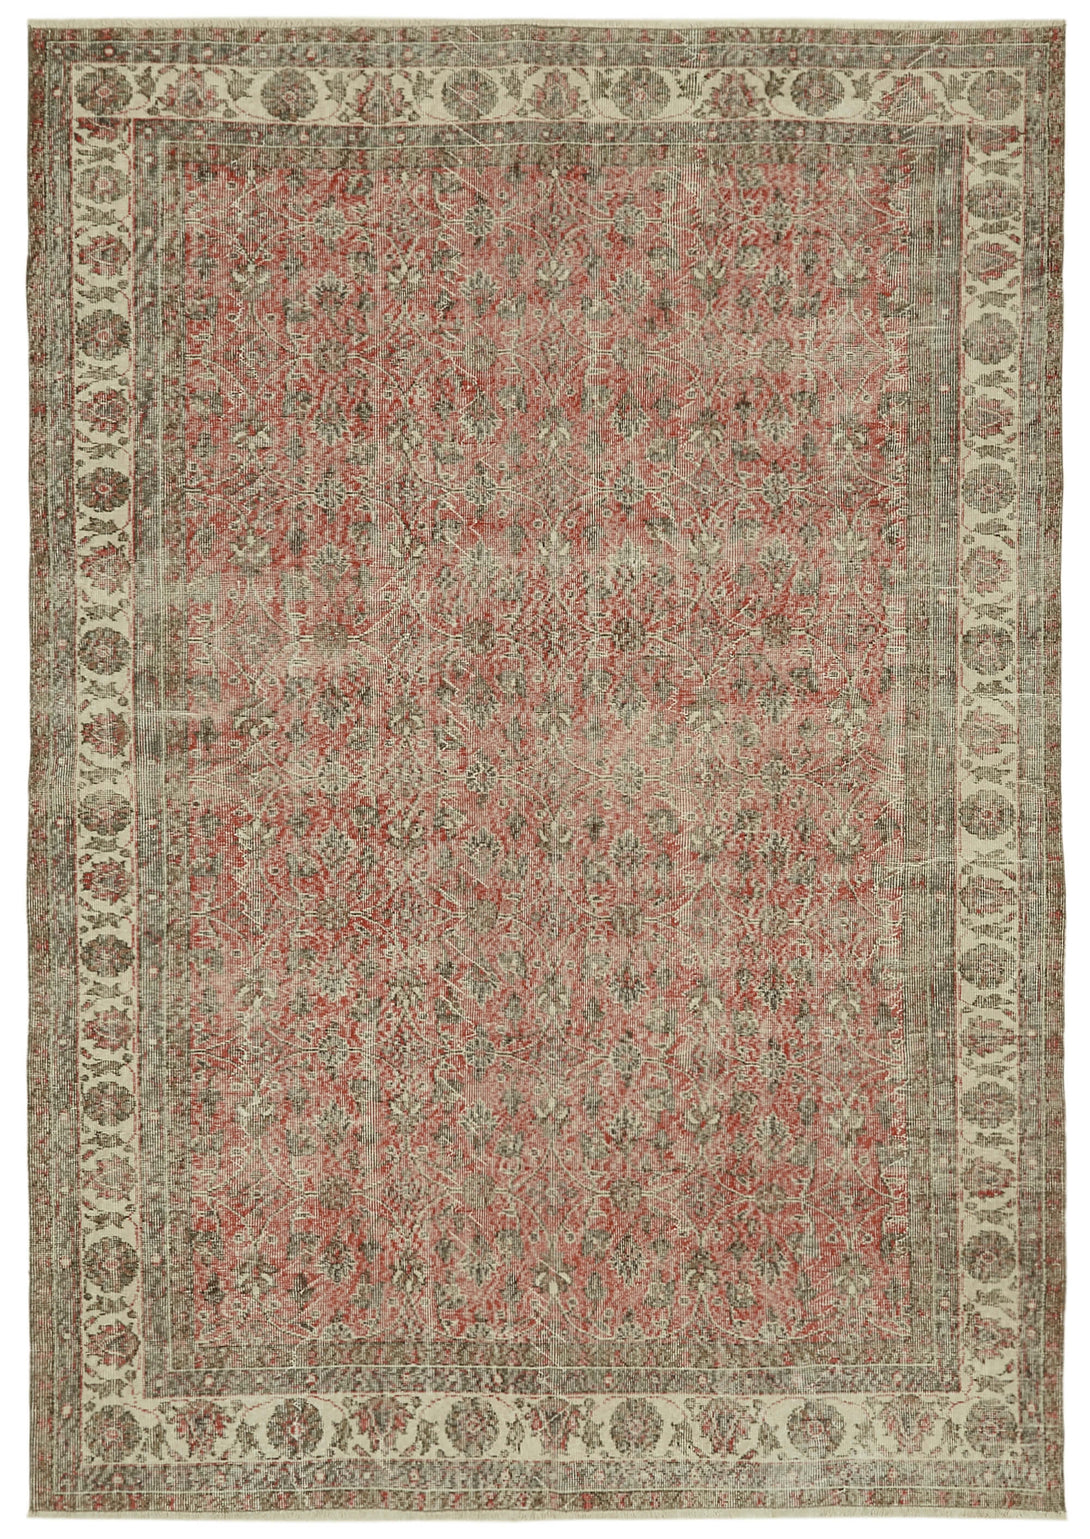 Handmade White Wash Area Rug > Design# OL-AC-41728 > Size: 6'-11" x 9'-10", Carpet Culture Rugs, Handmade Rugs, NYC Rugs, New Rugs, Shop Rugs, Rug Store, Outlet Rugs, SoHo Rugs, Rugs in USA